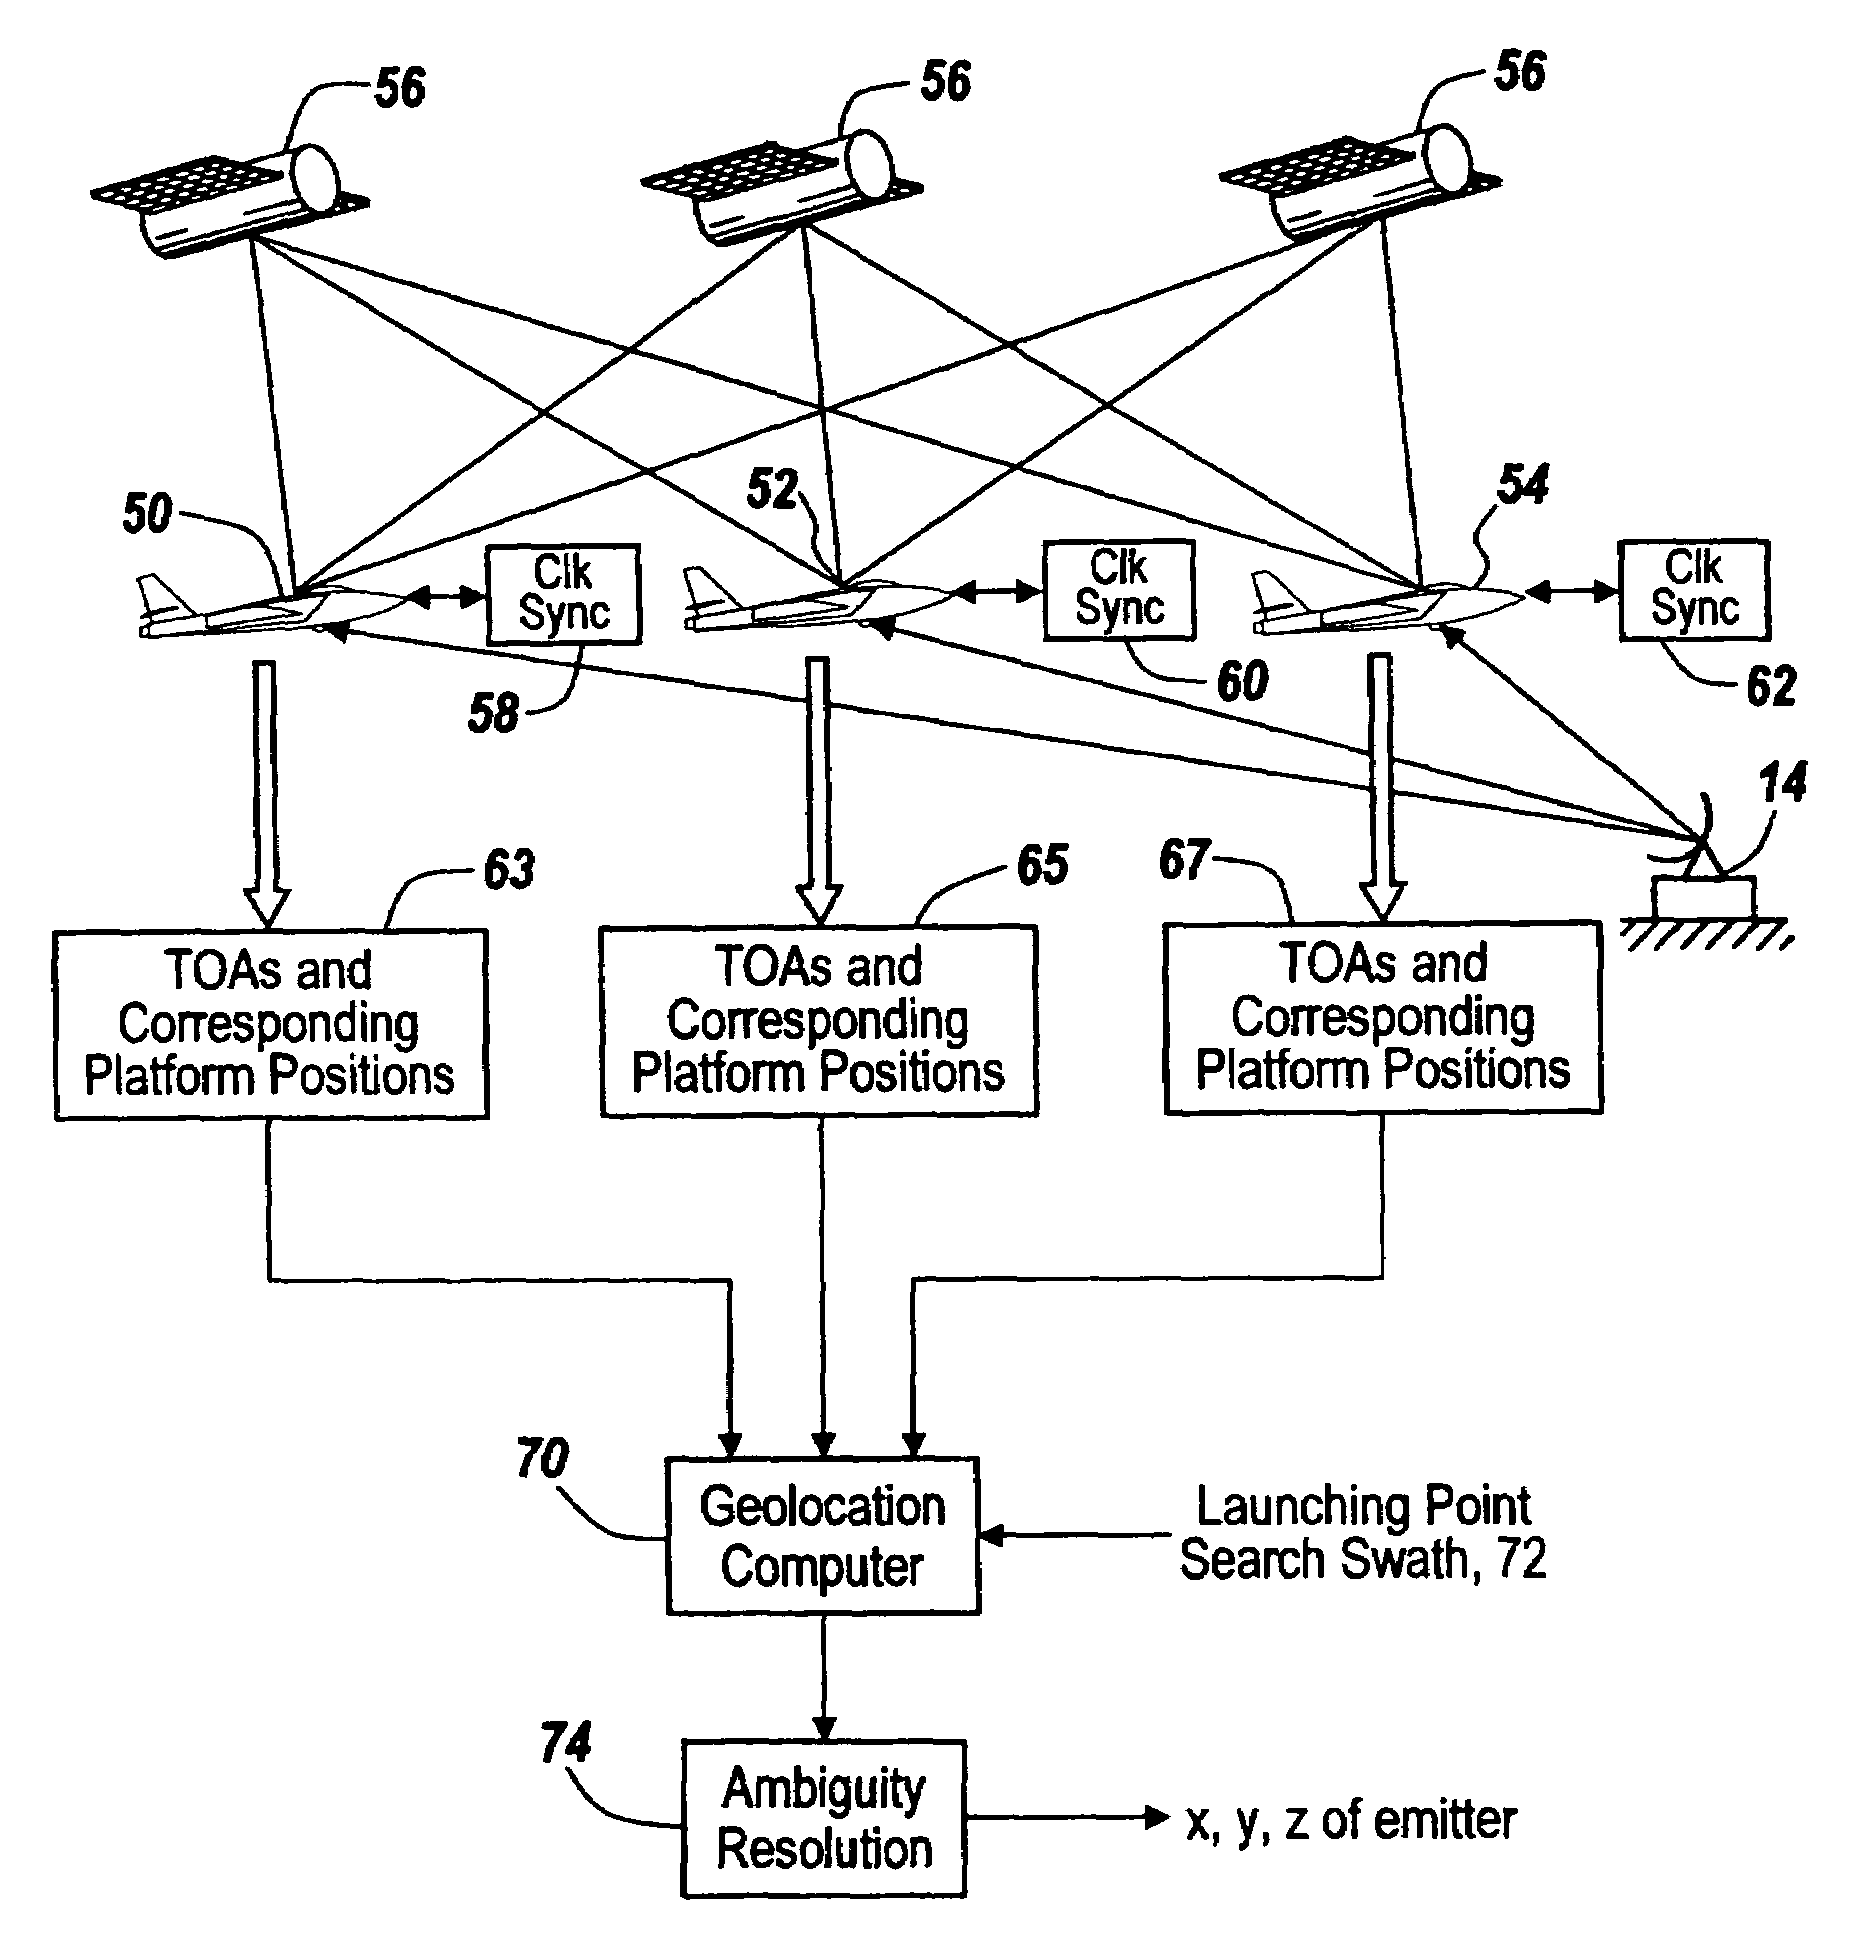 Multi-ship coherent geolocation system